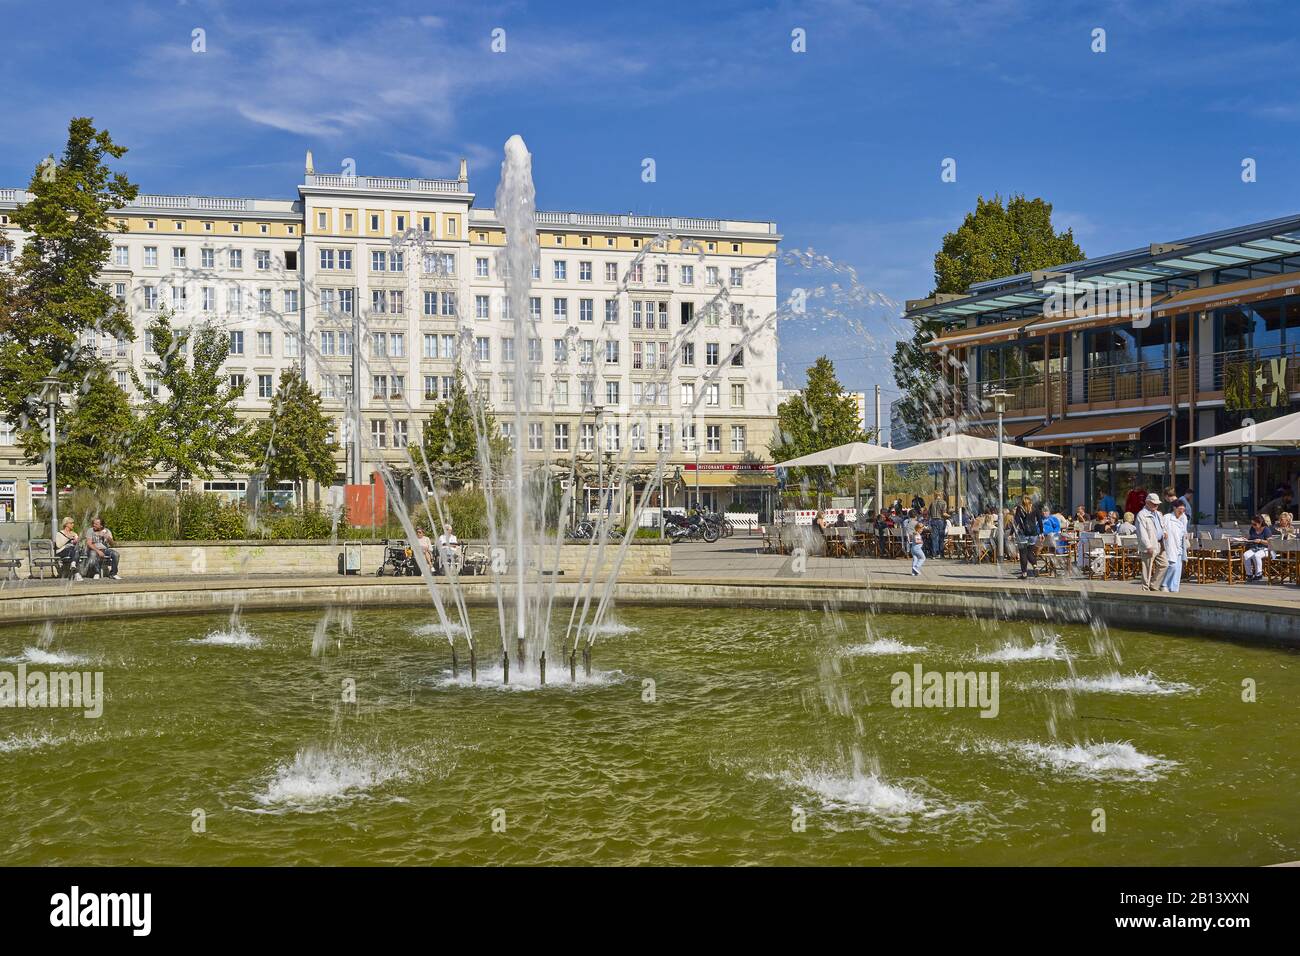 Cafe on Ulrichplatz with building in the architectural style of Socialist Classicism,Magdeburg,Saxony-Anhalt,Germany Stock Photo